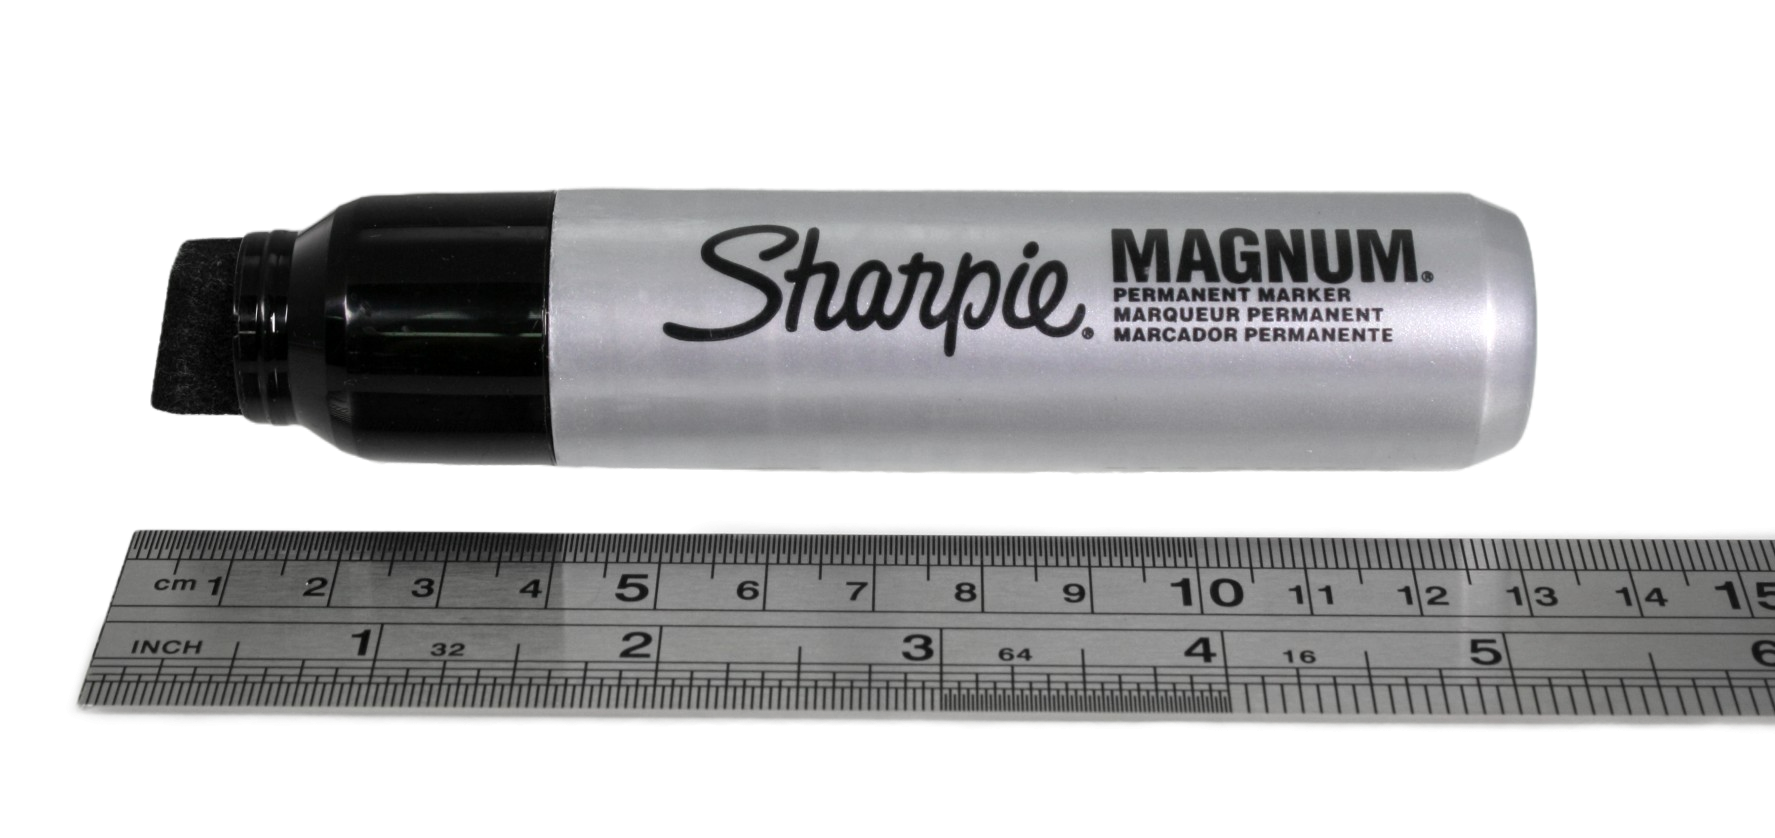 Magnum marker, lid off, next to a ruler showing that the total length is just over 13cm